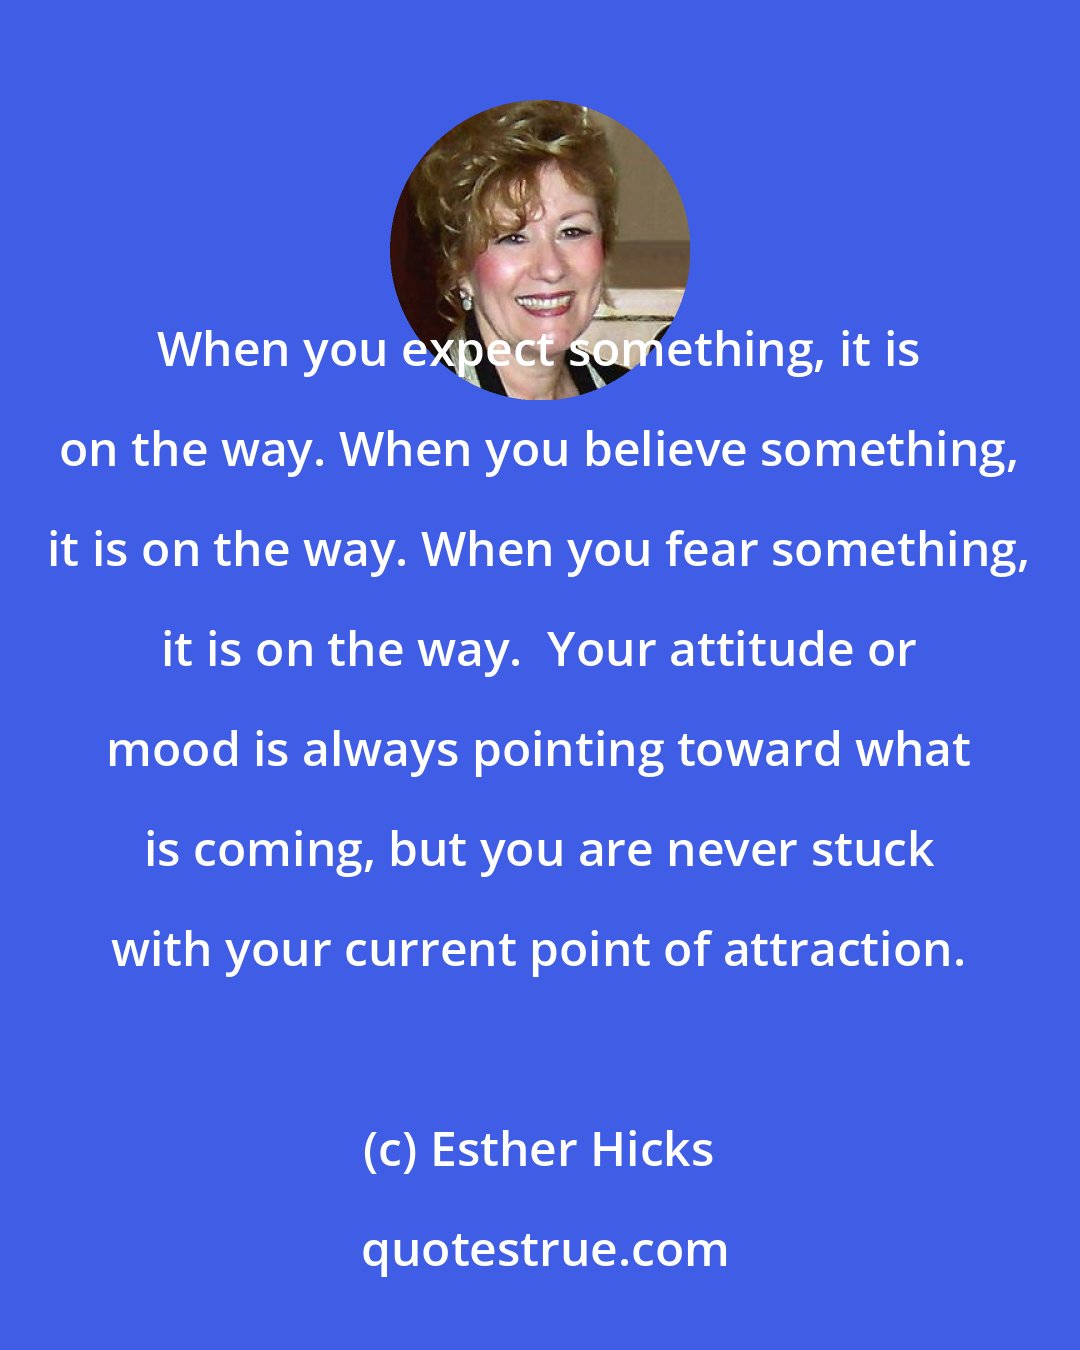 Esther Hicks: When you expect something, it is on the way. When you believe something, it is on the way. When you fear something, it is on the way.  Your attitude or mood is always pointing toward what is coming, but you are never stuck with your current point of attraction.